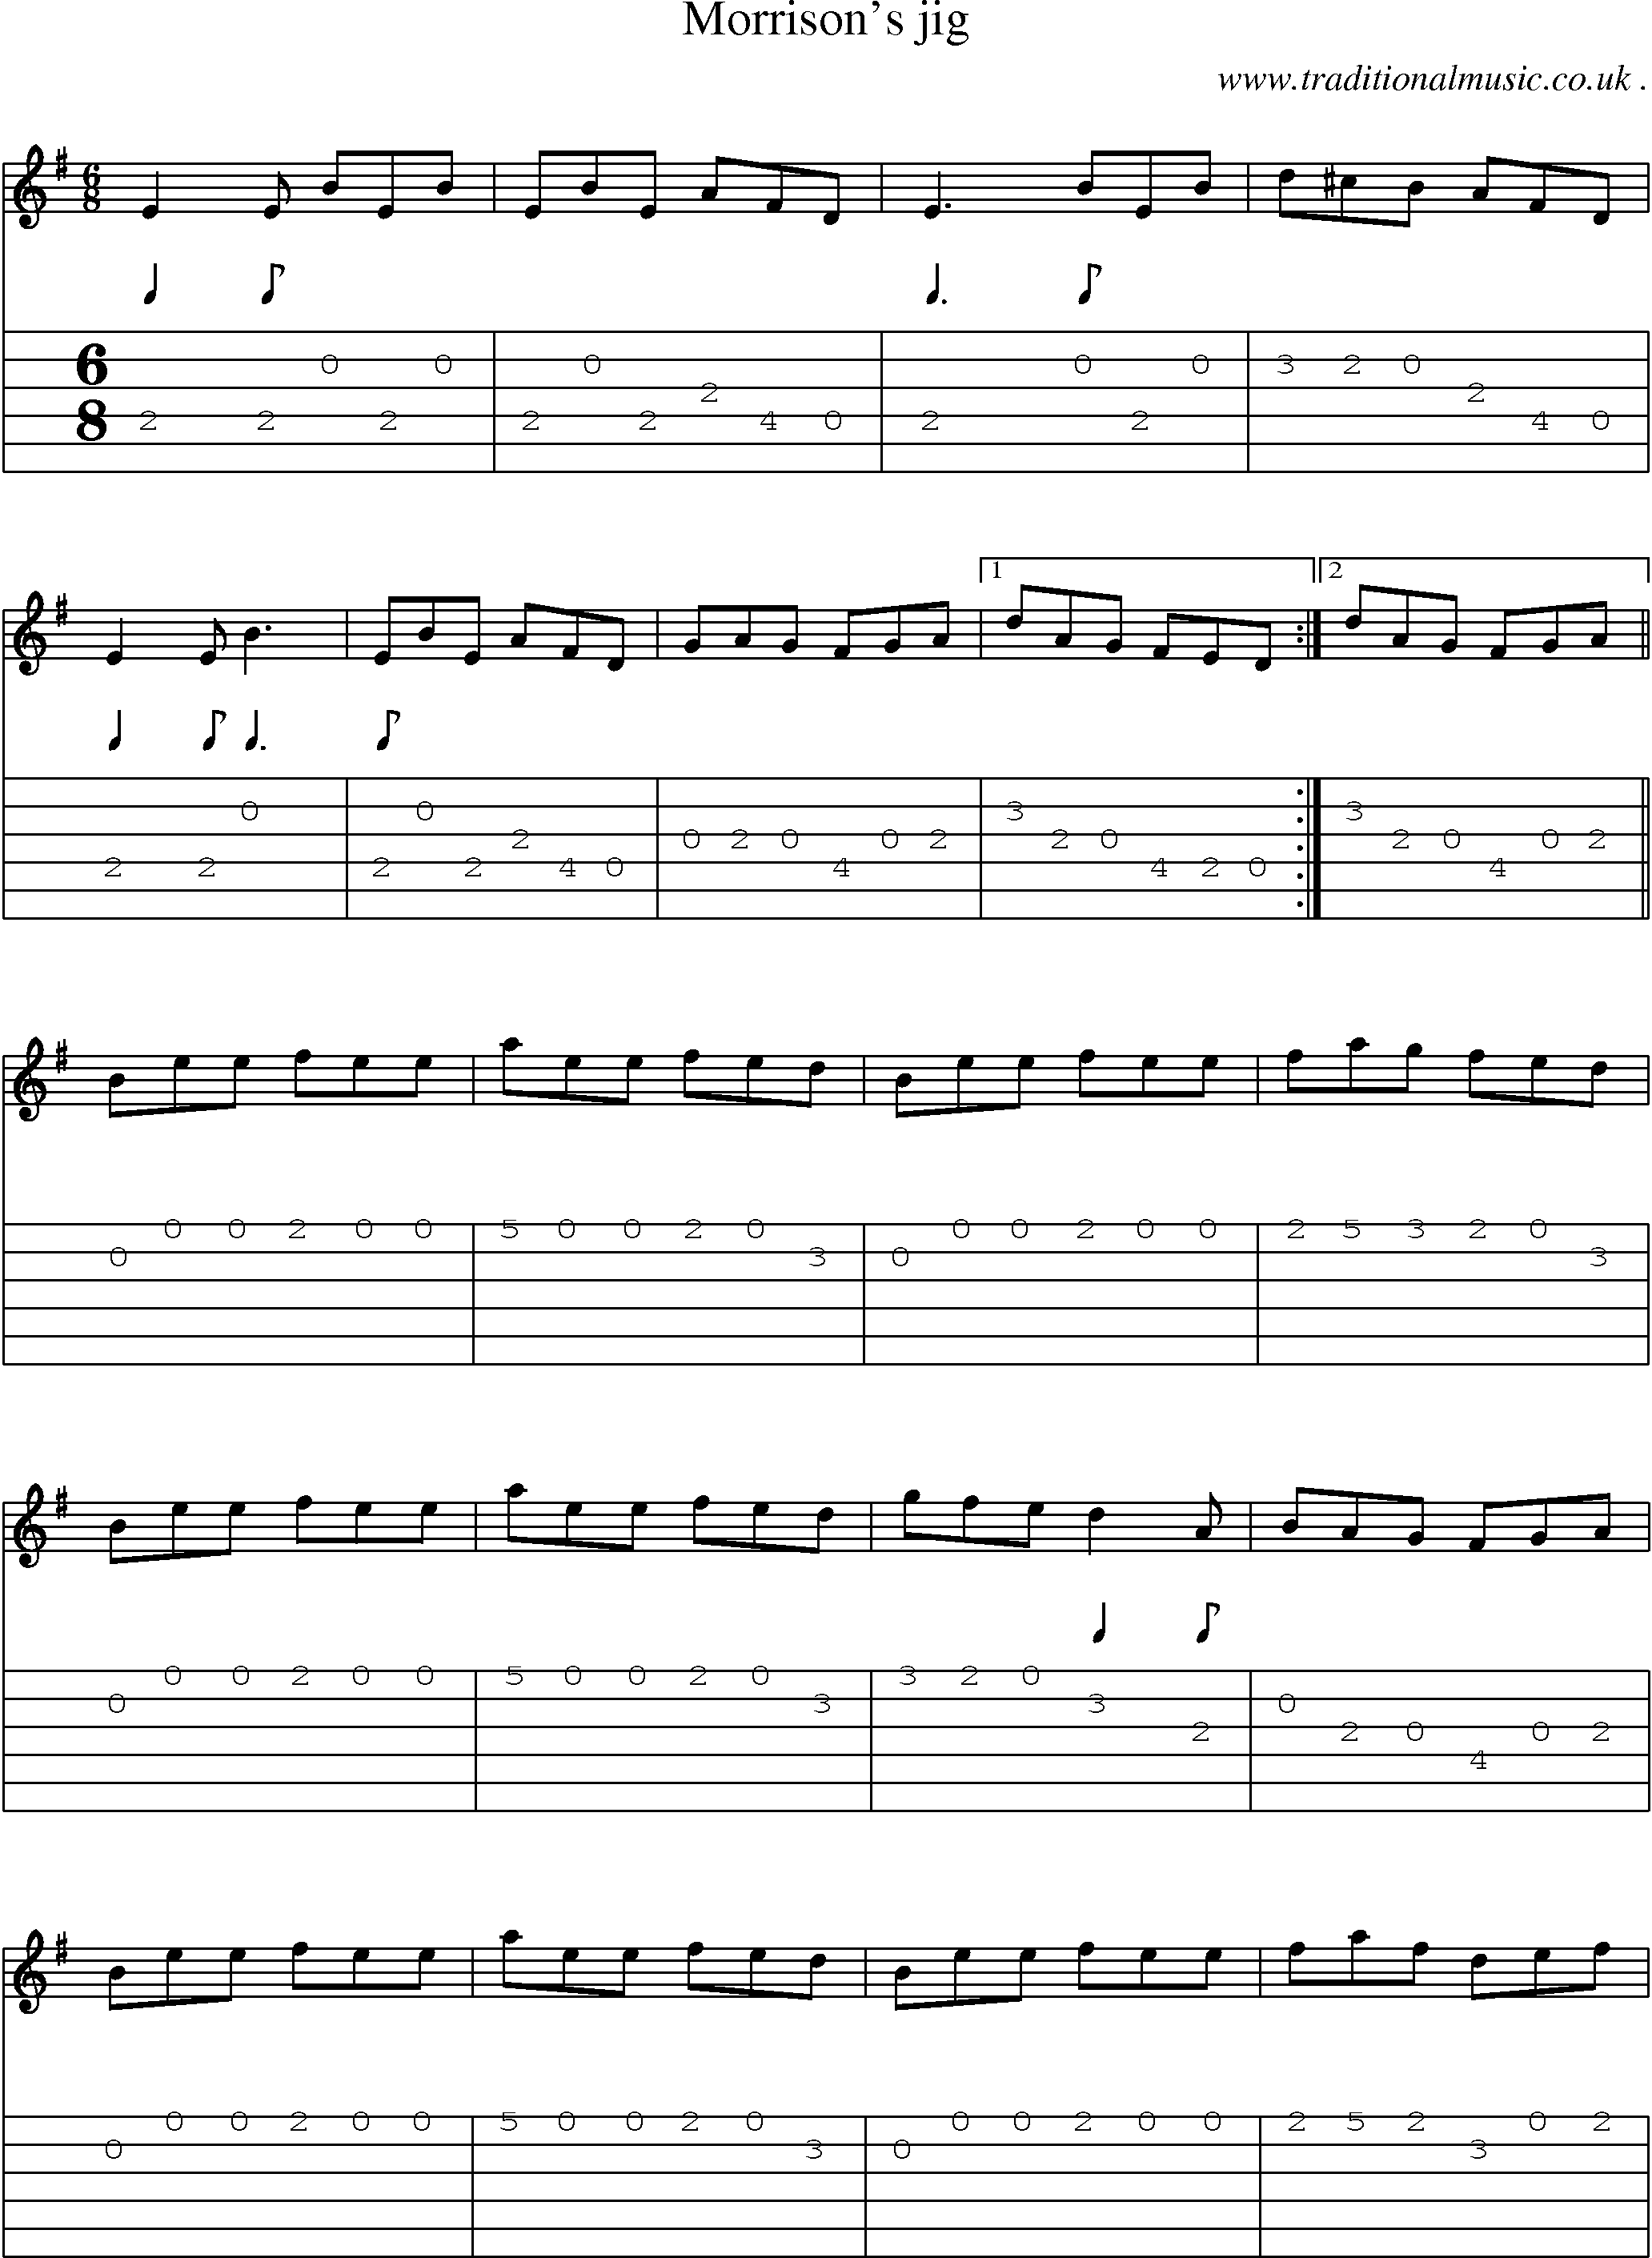 Sheet-Music and Guitar Tabs for Morrisons Jig